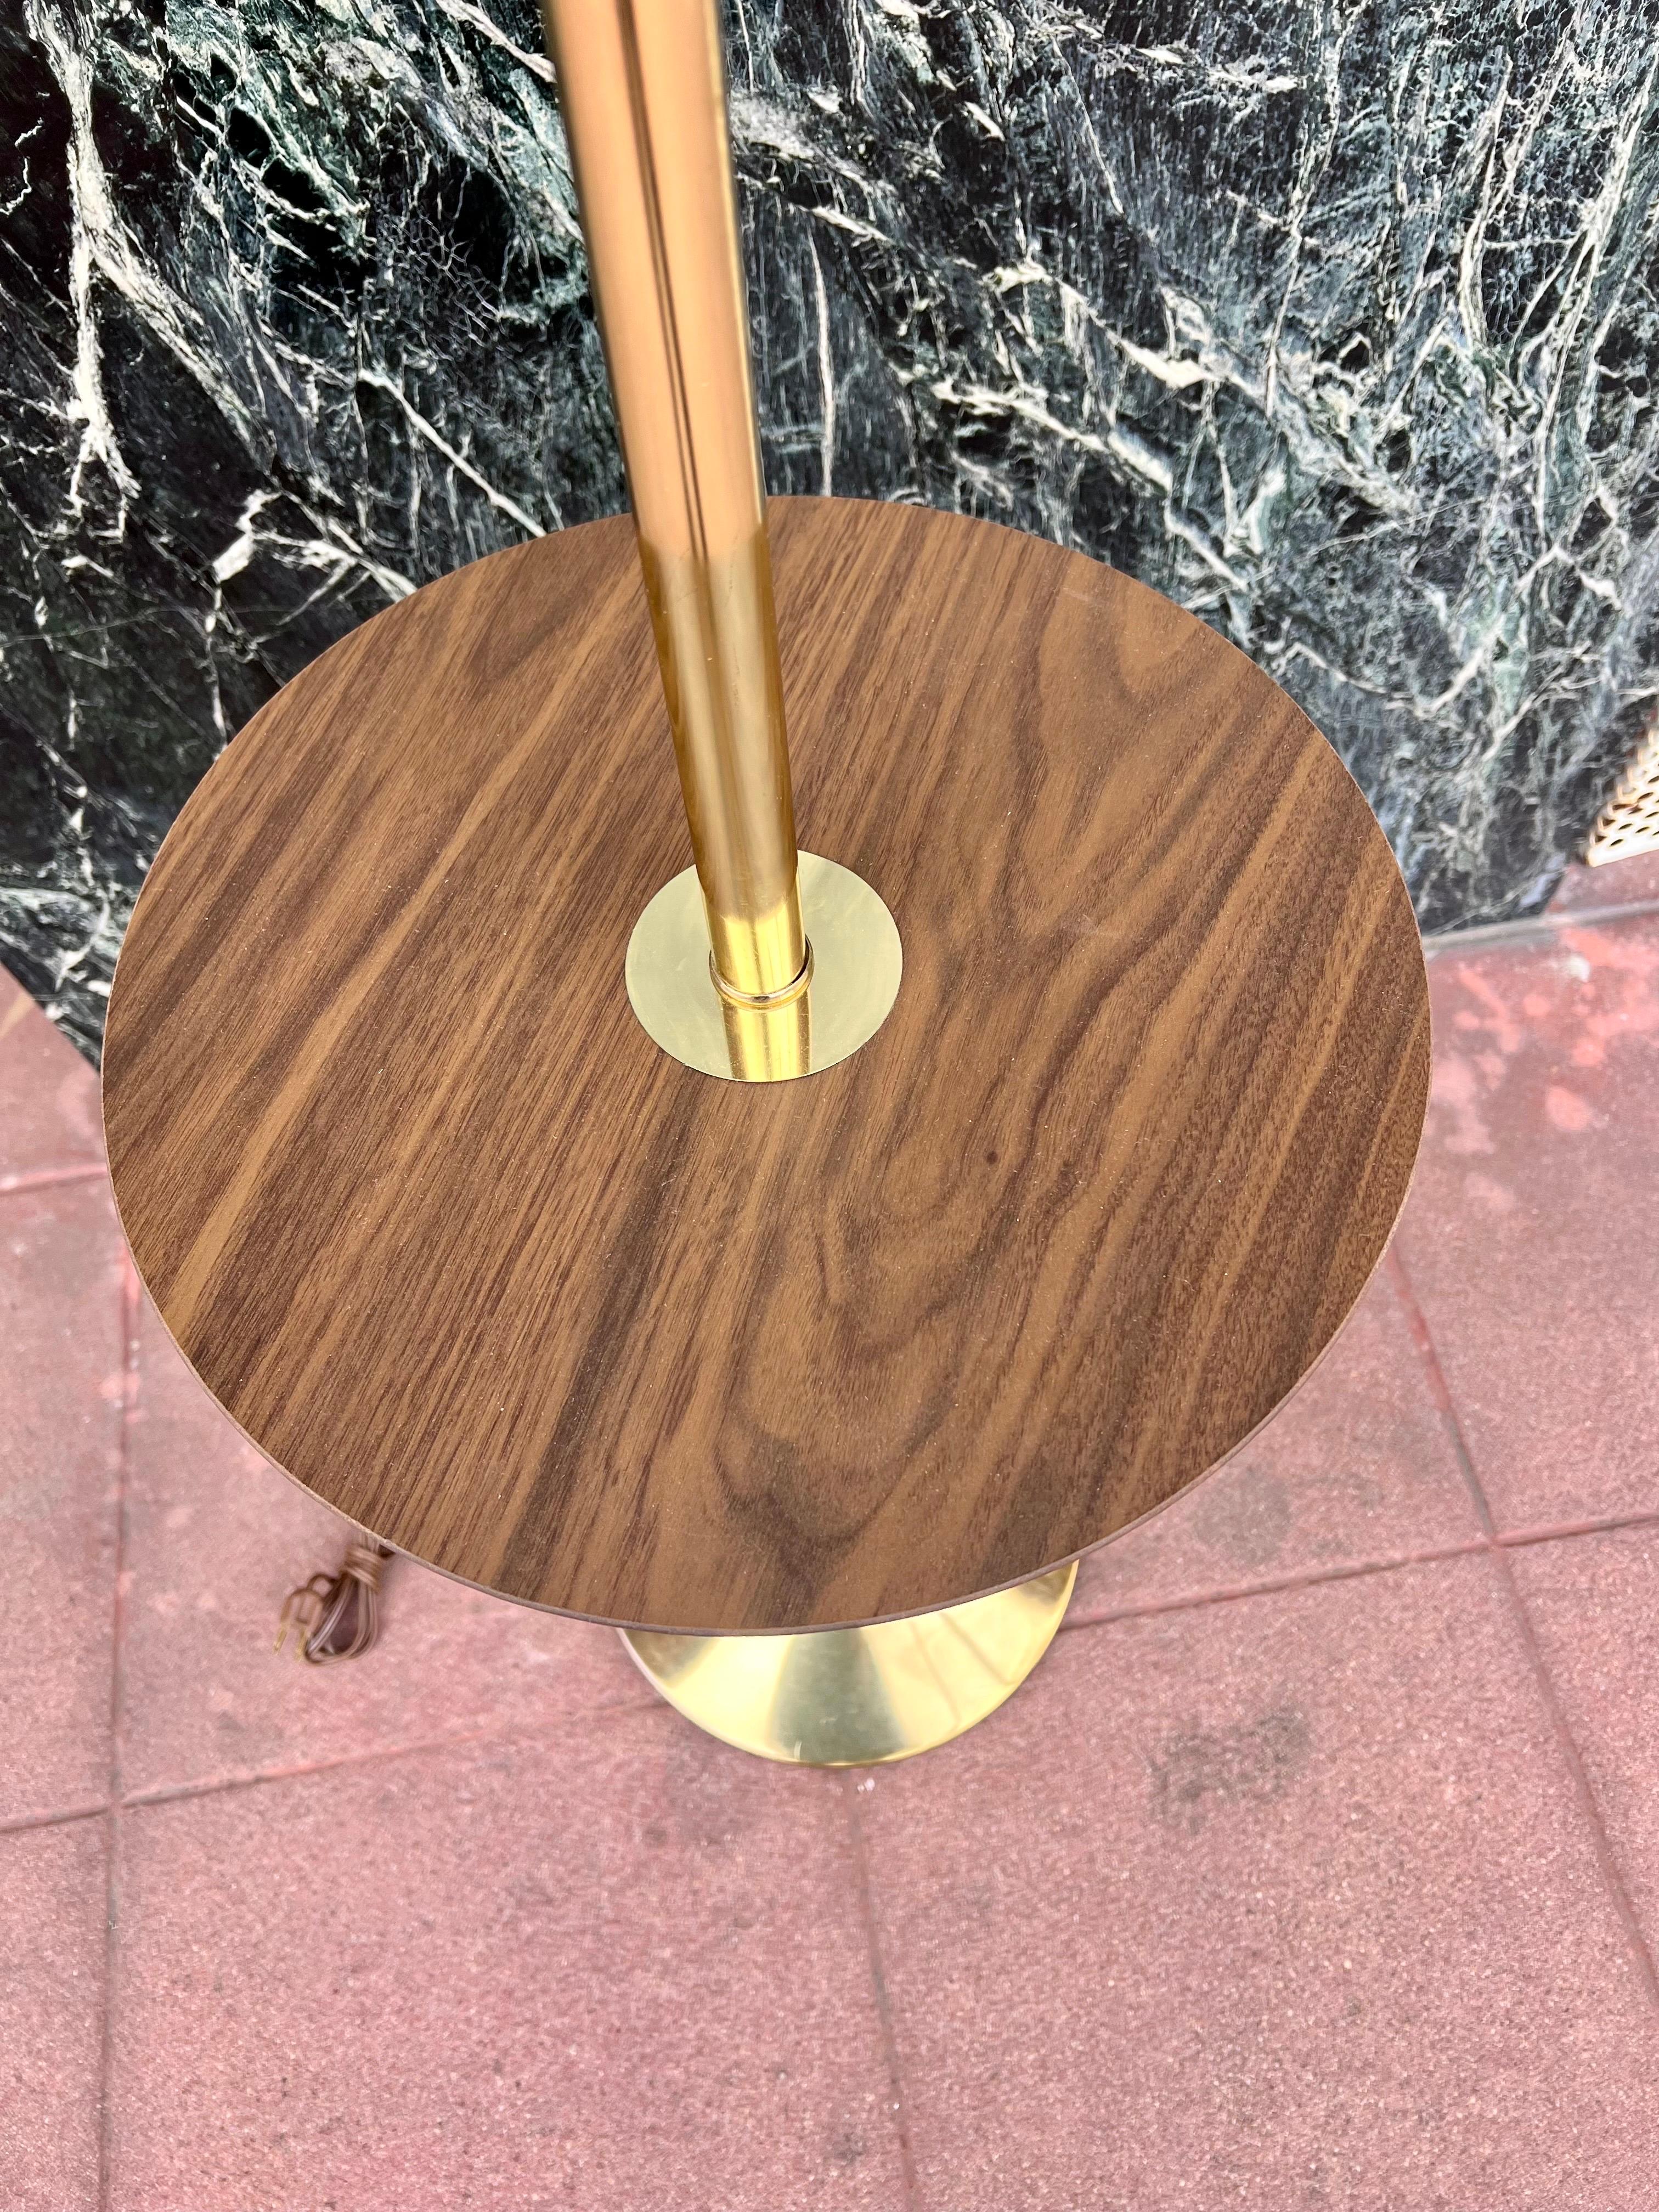 American Mid-Century atomic Age Walnut & Brass Laminate Floor Table Lamp In Excellent Condition For Sale In San Diego, CA